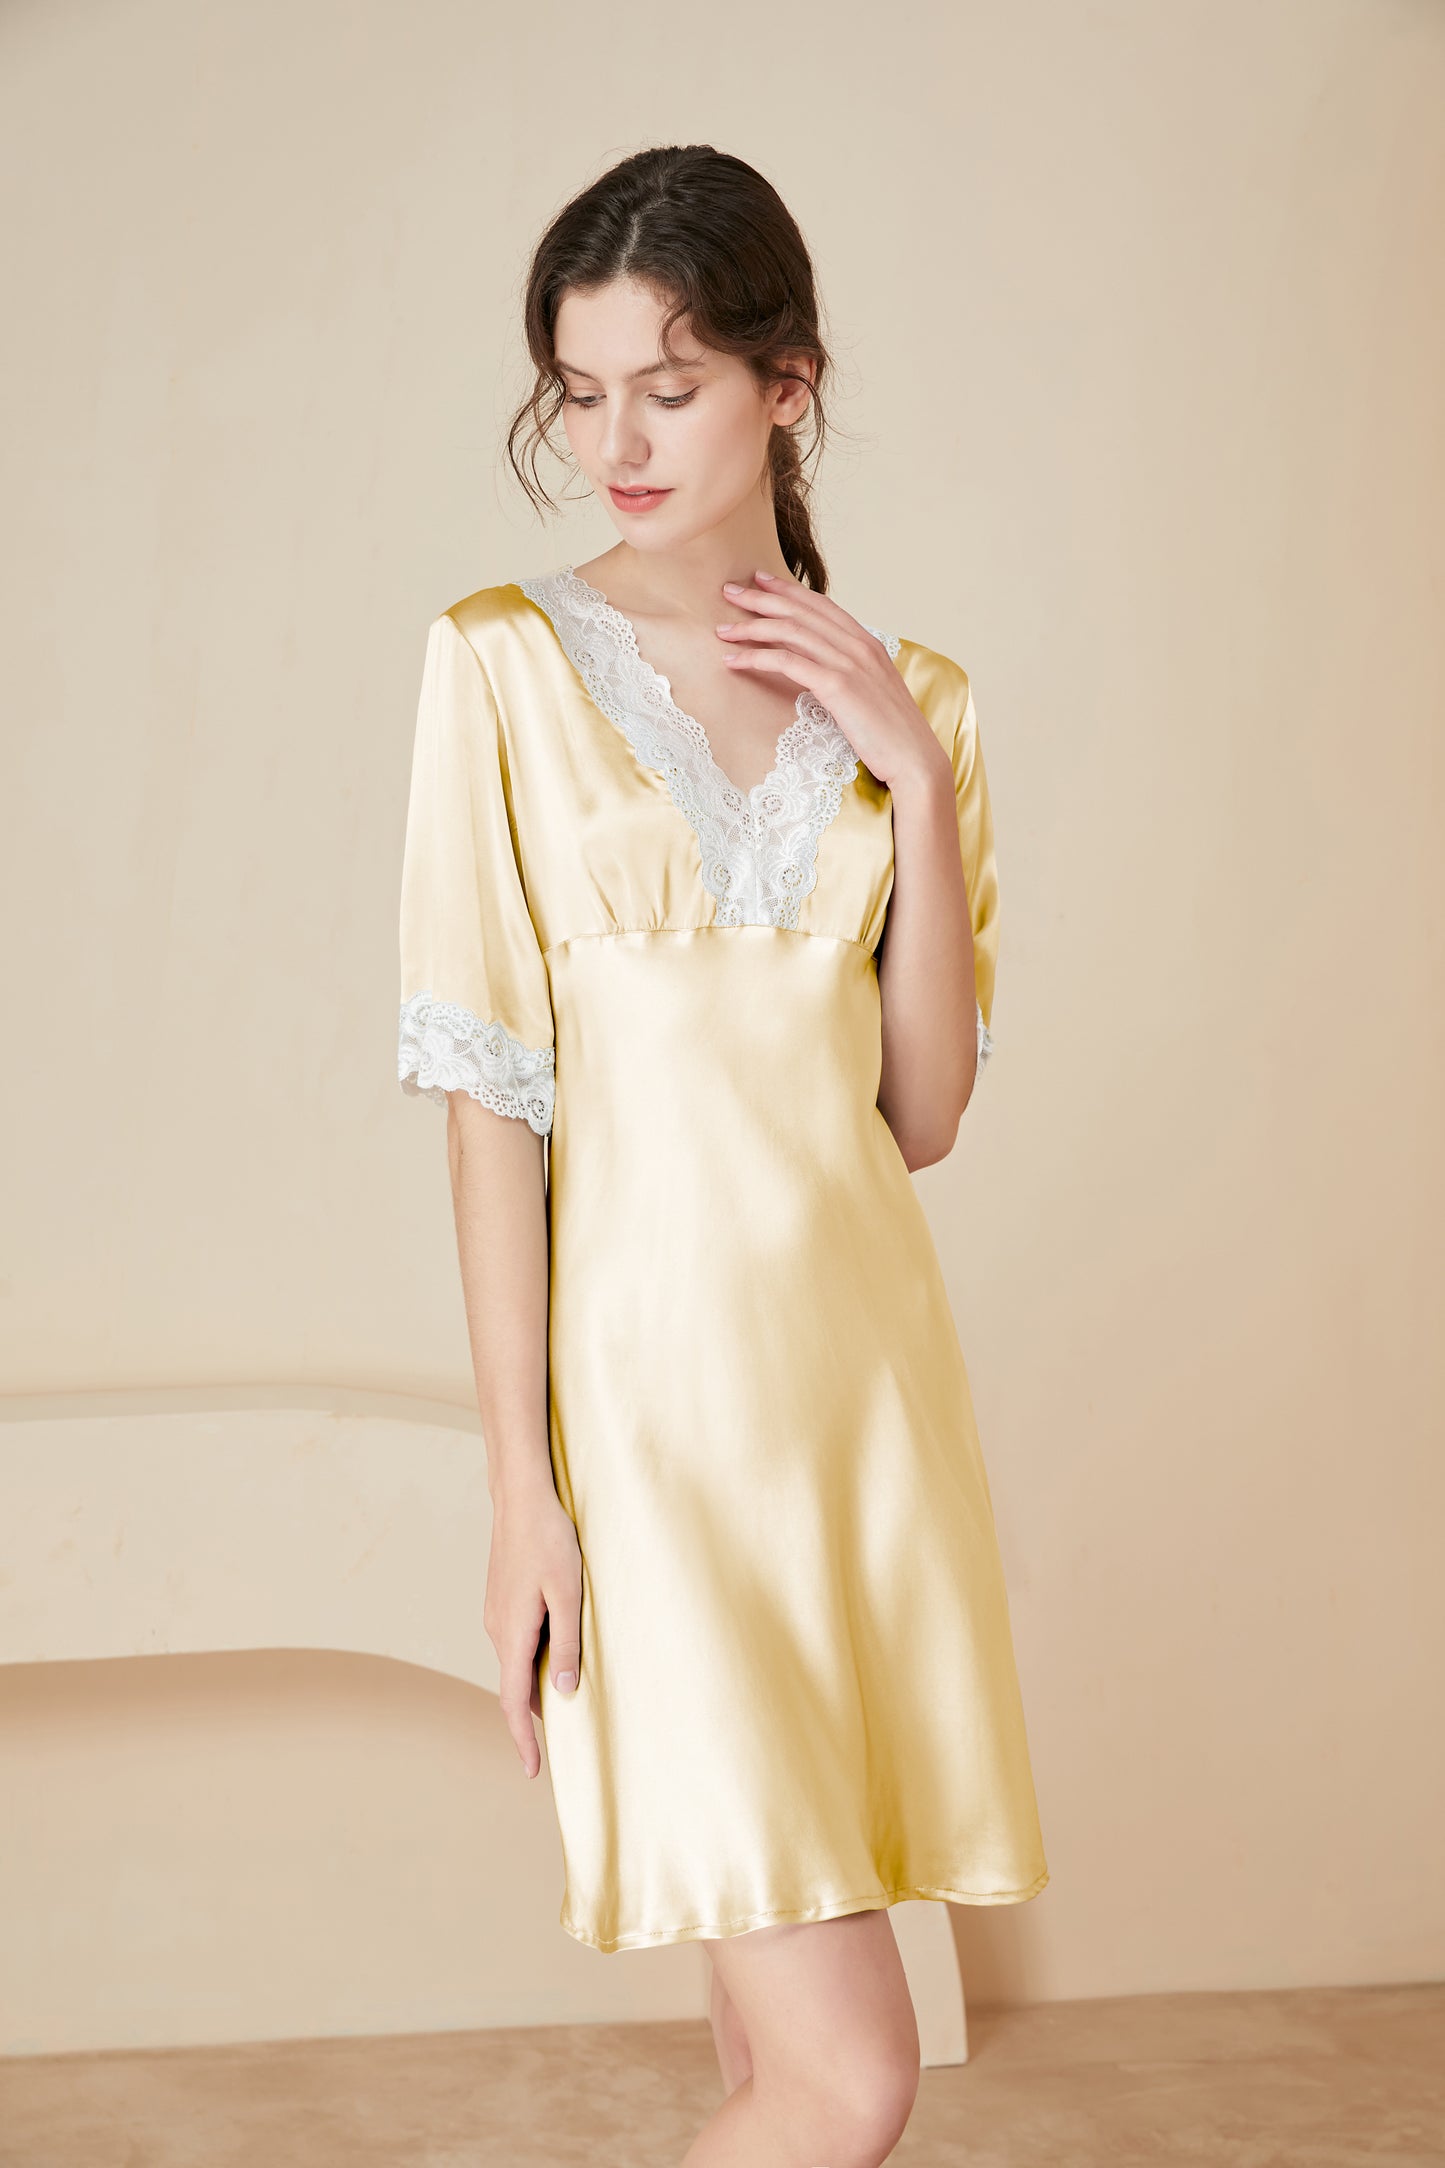 Short-sleeved silk and lace nightgown